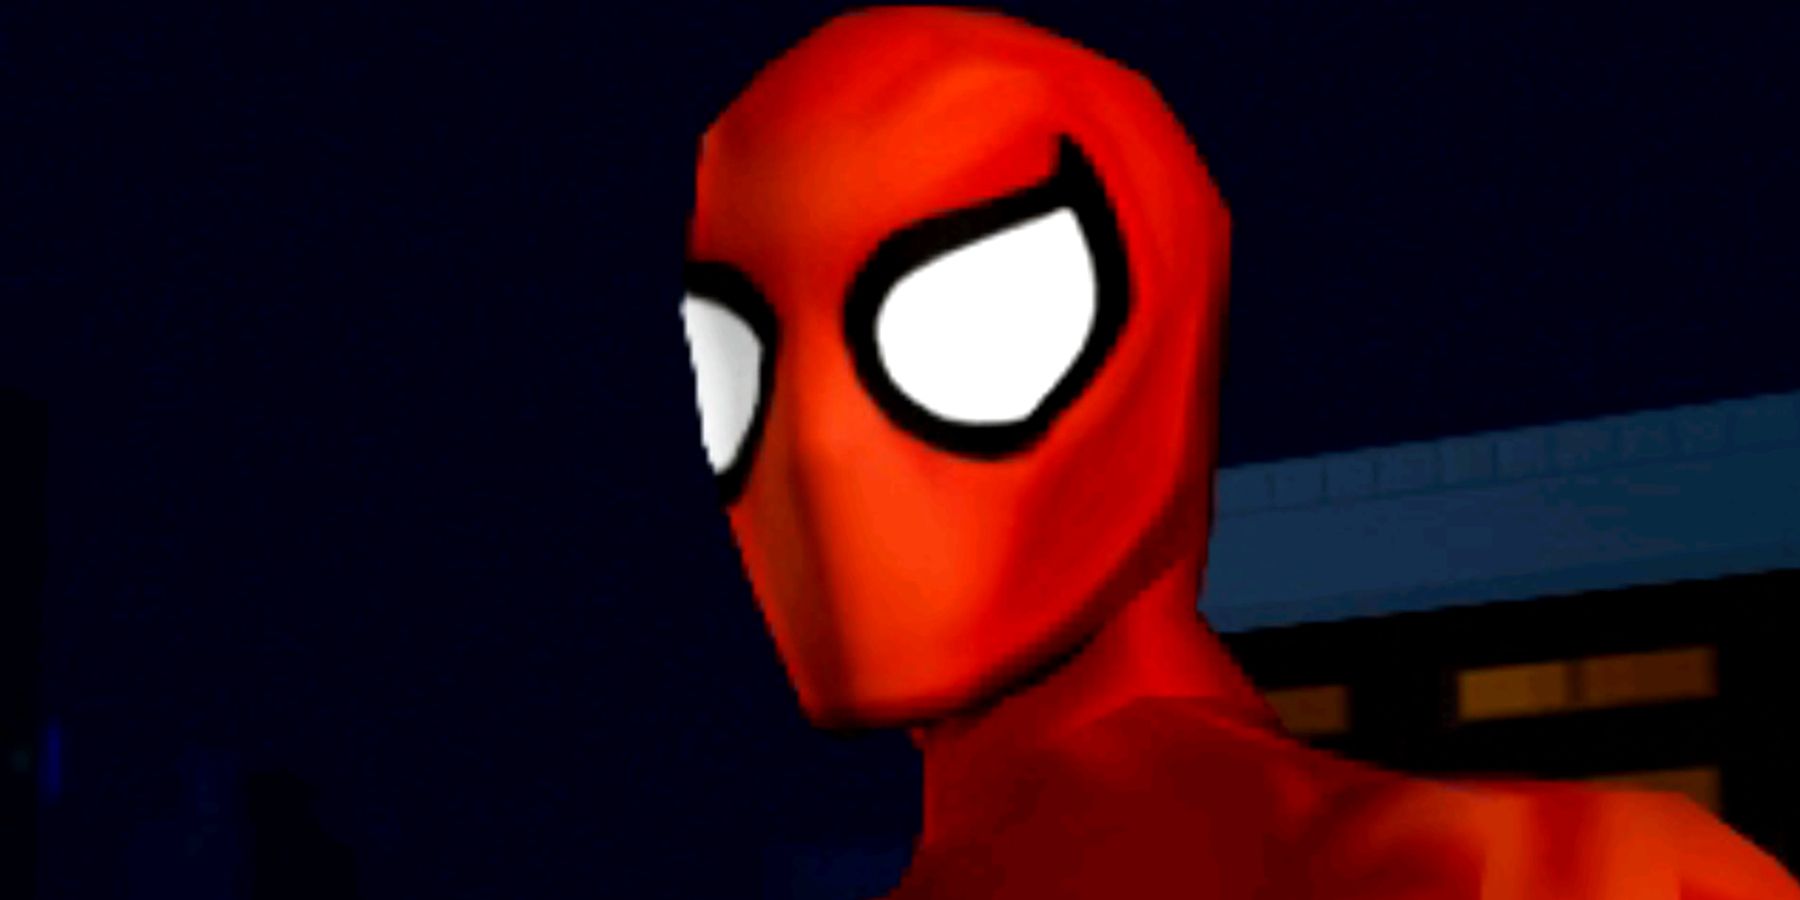 spider-man ps1 marvel's spider-man cosmetic skin fan request